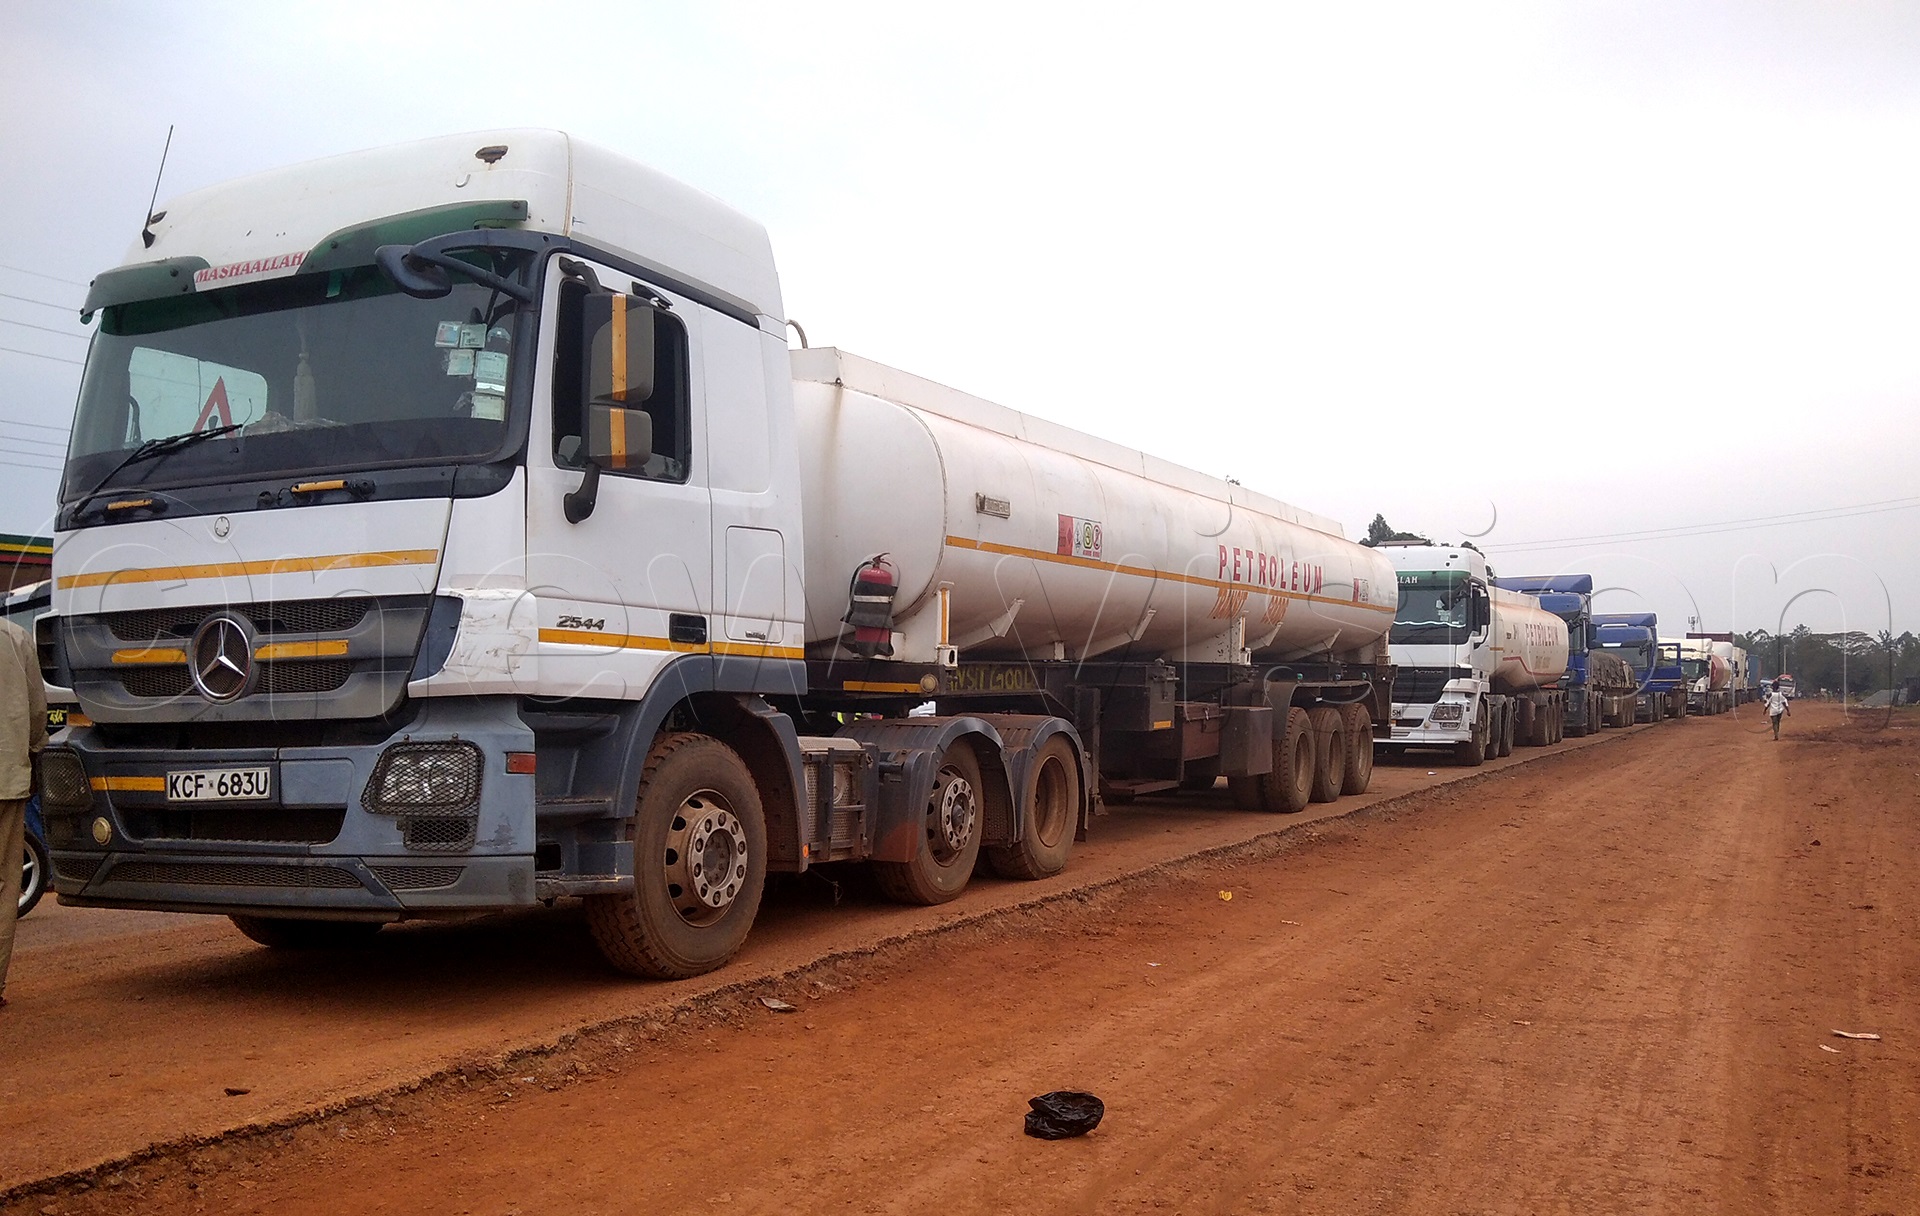 Mbale, where truckers are like manna for extortion by city authorities